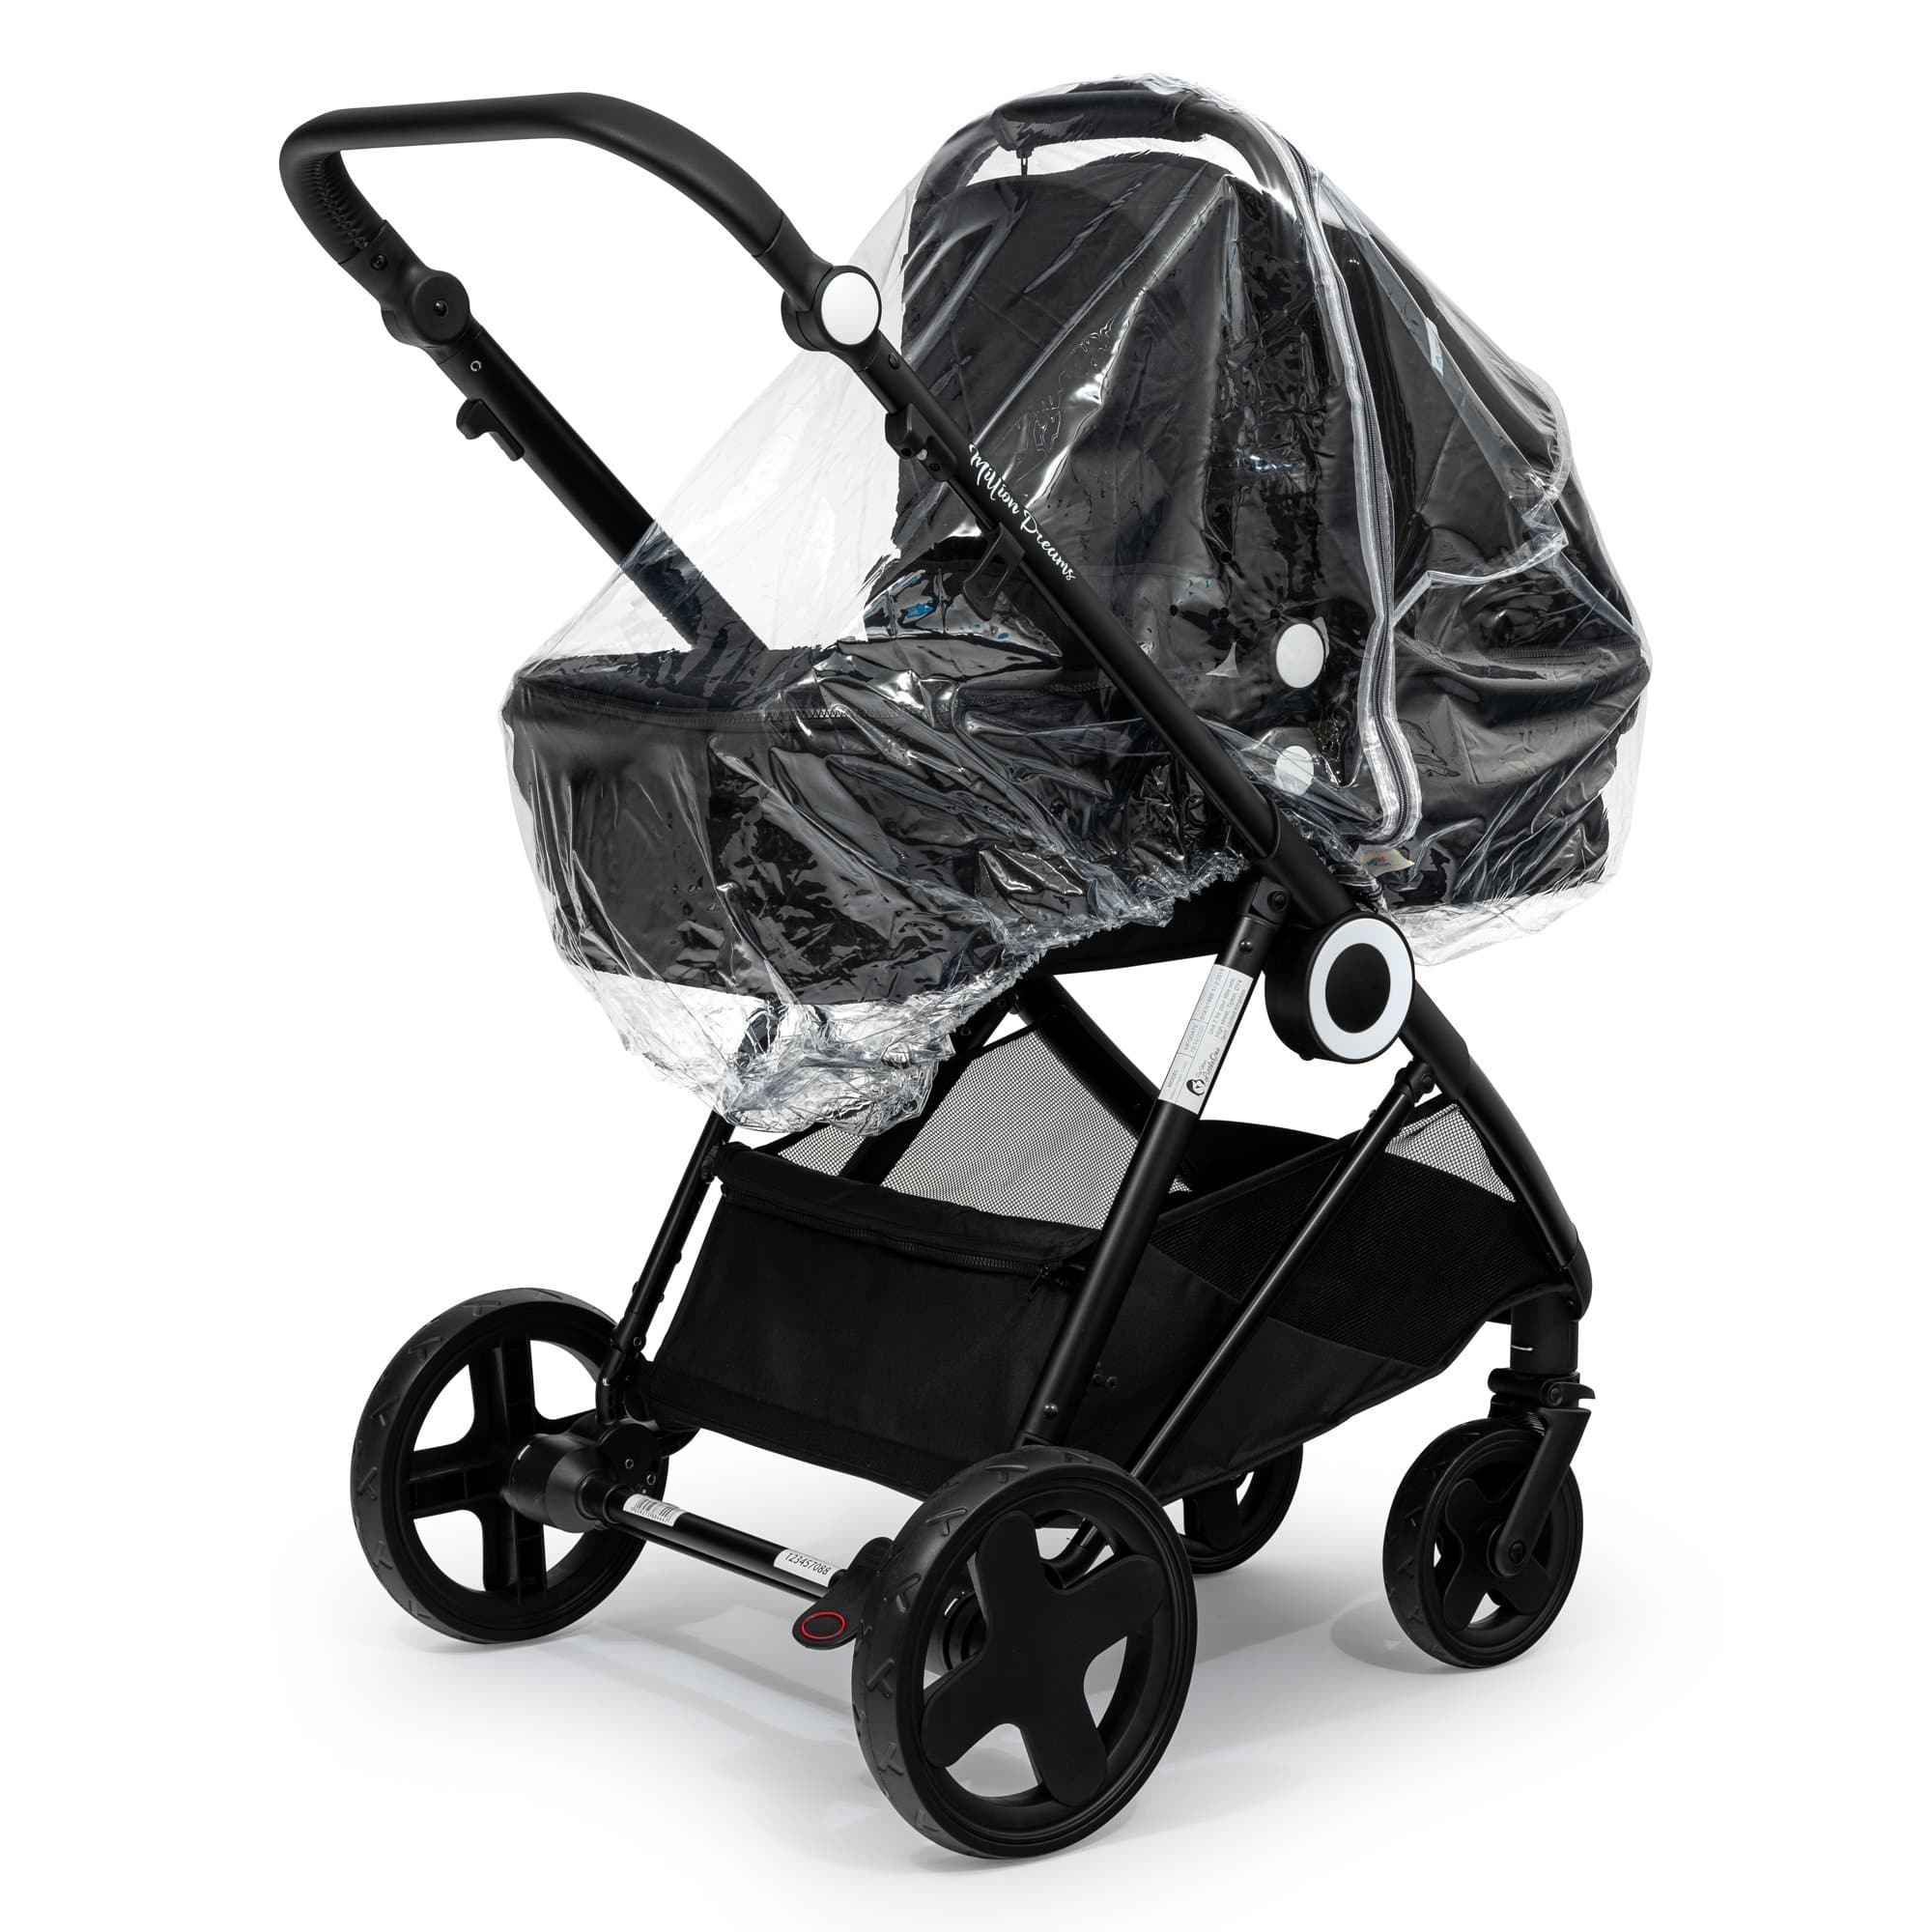 2 in 1 Rain Cover Compatible with Brevi - Fits All Models - For Your Little One